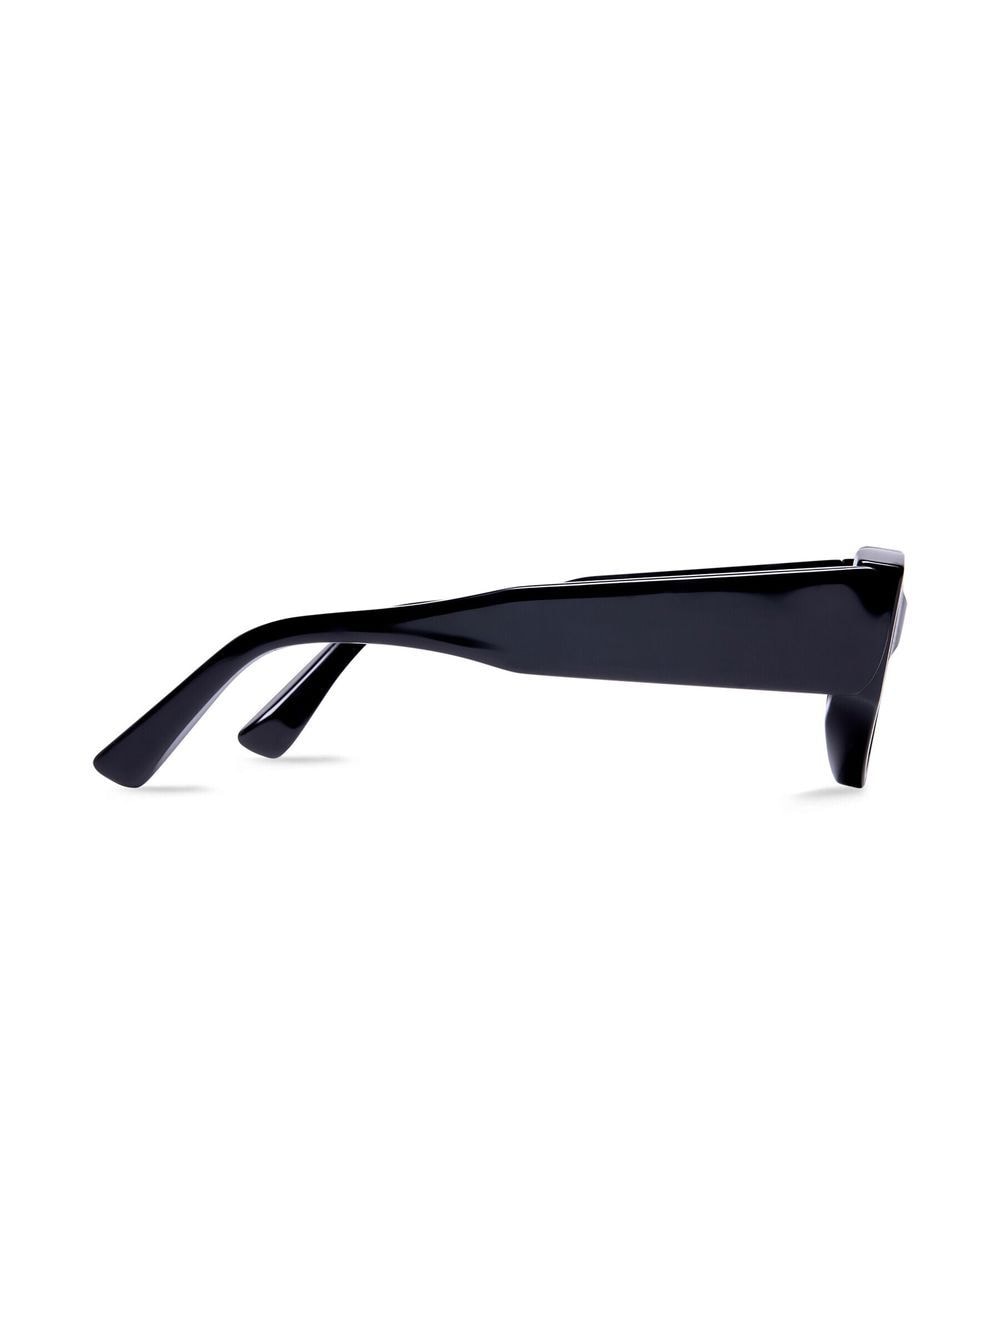 Offset- The Two Tone Oval Edge Cat Eye Sunglasses 6 Colors Other Blue Black / O/S